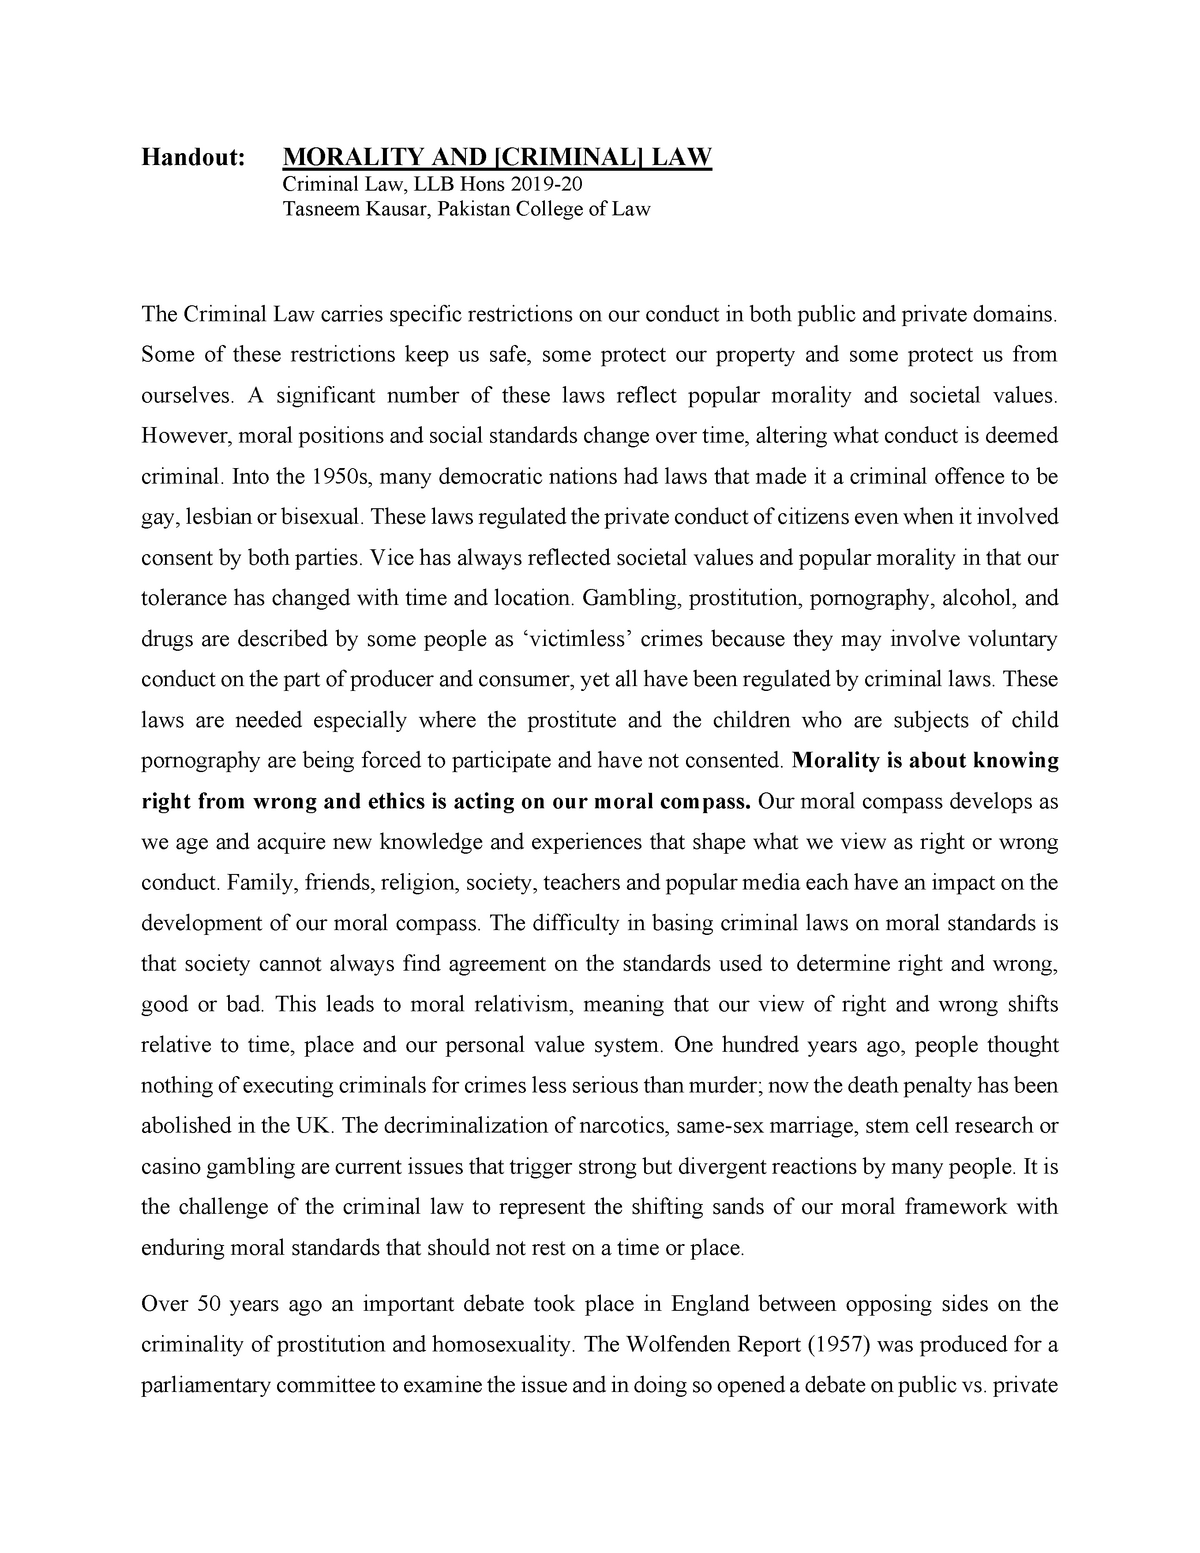 criminal law and common morality research paper